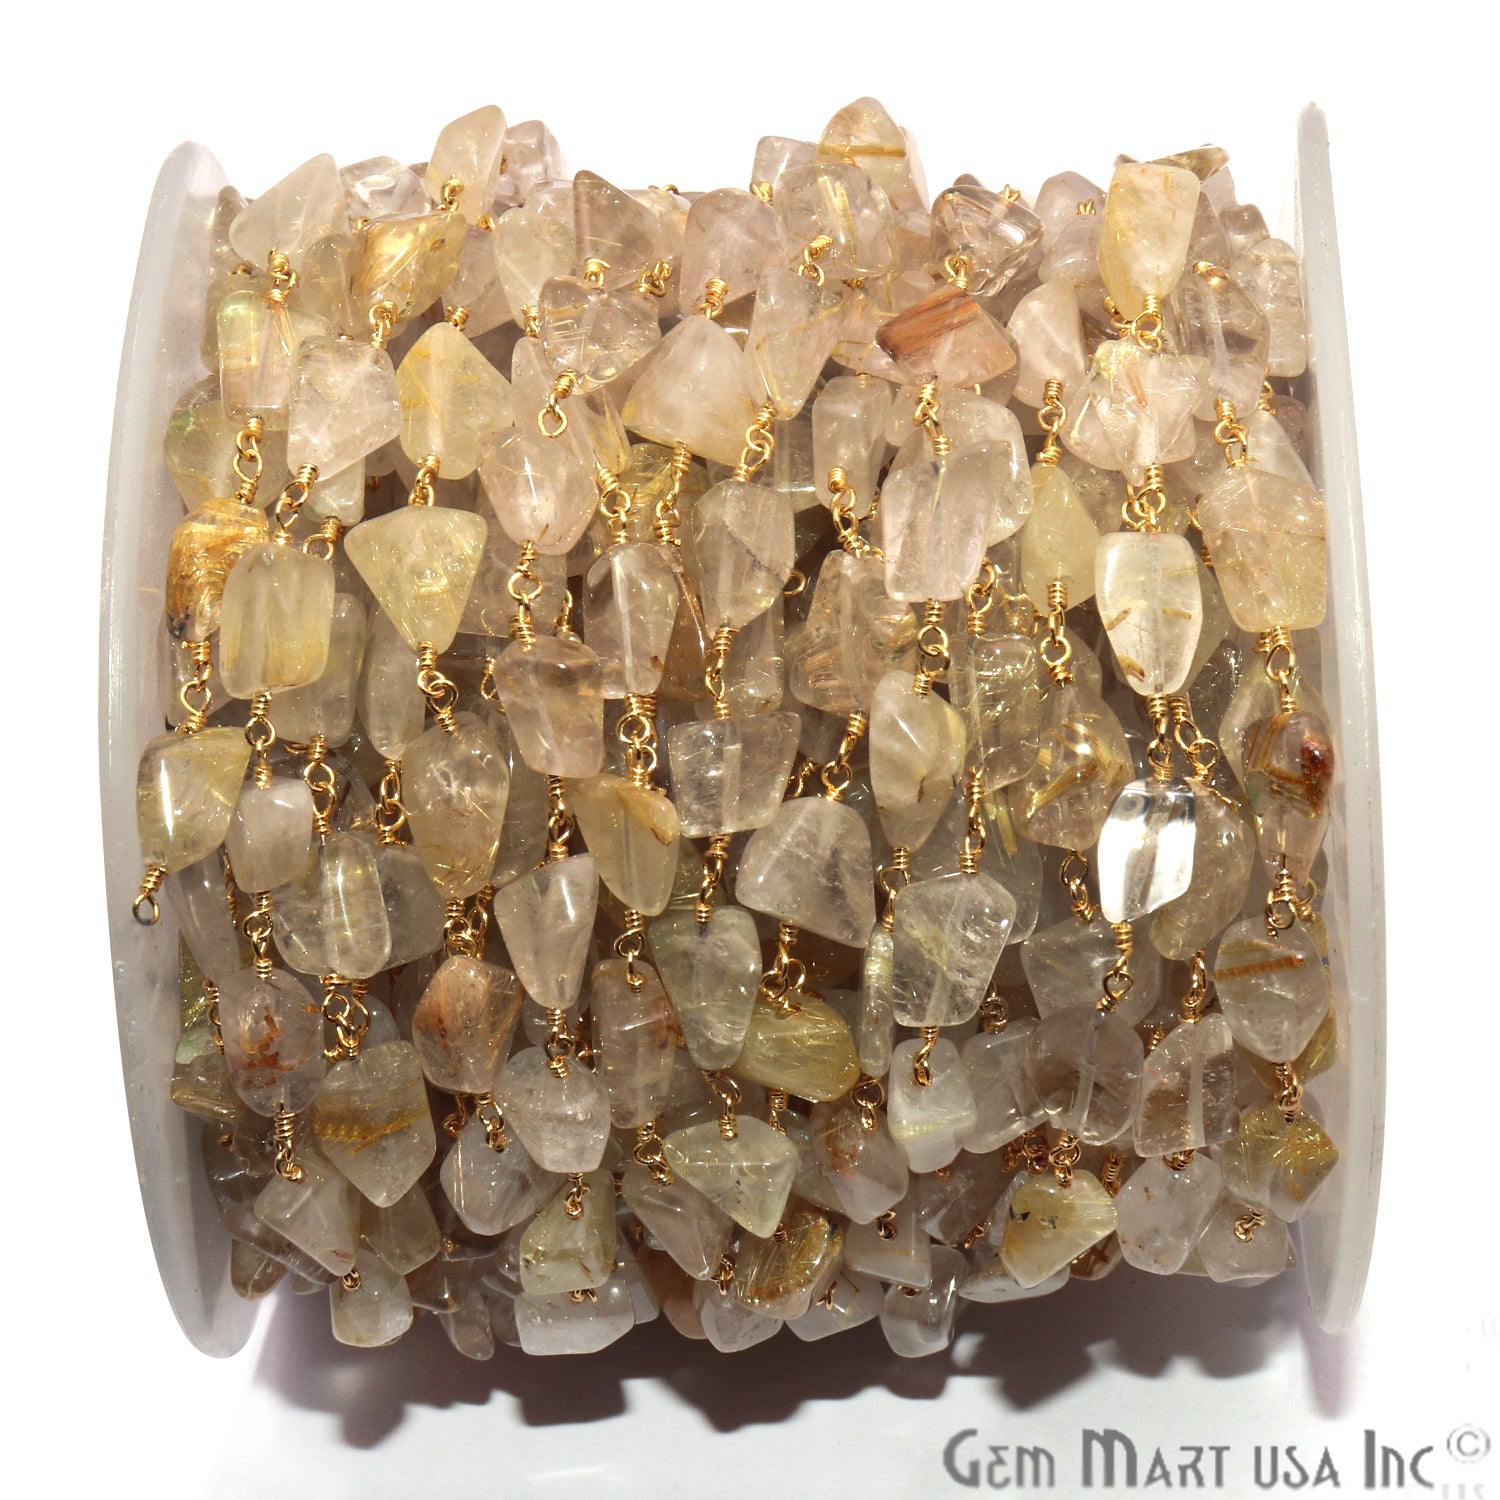 Golden Rutile Smooth Tumble Gold Wire Wrap Rough Bead Rosary Chain - GemMartUSA